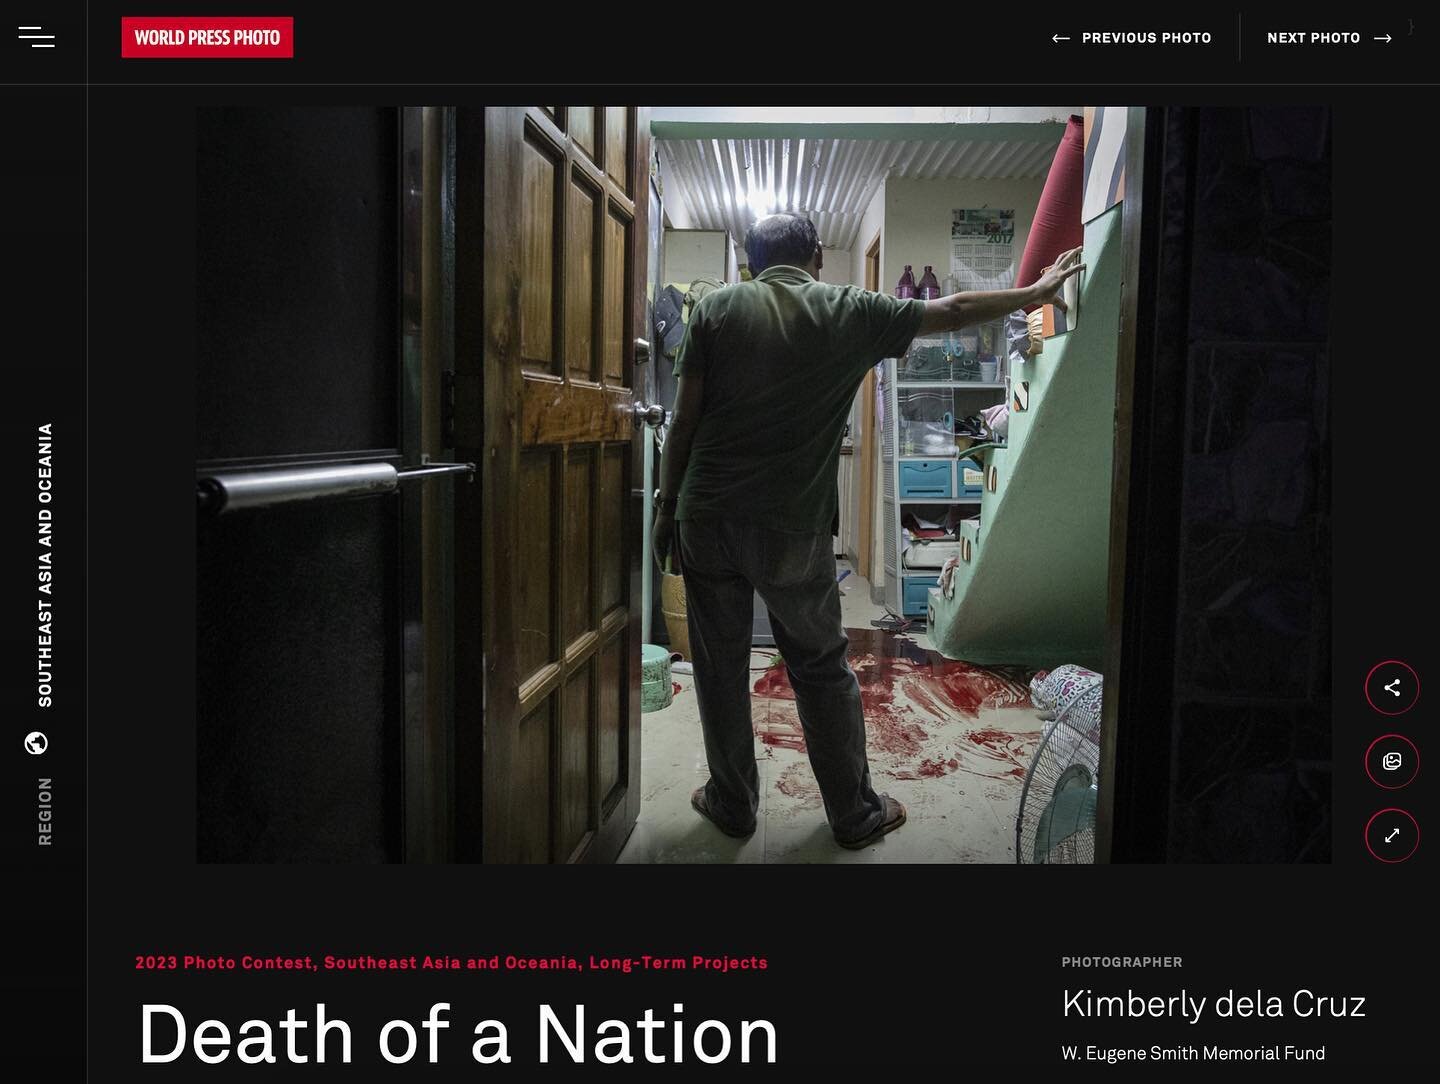 Honored and humbled to be selected as one of the regional winners of World Press Photo for Long term Projects in Southeast Asia and Oceania. 

Death of a Nation is a project of 6 years, witnessing crime scenes to funerals and the life that comes afte